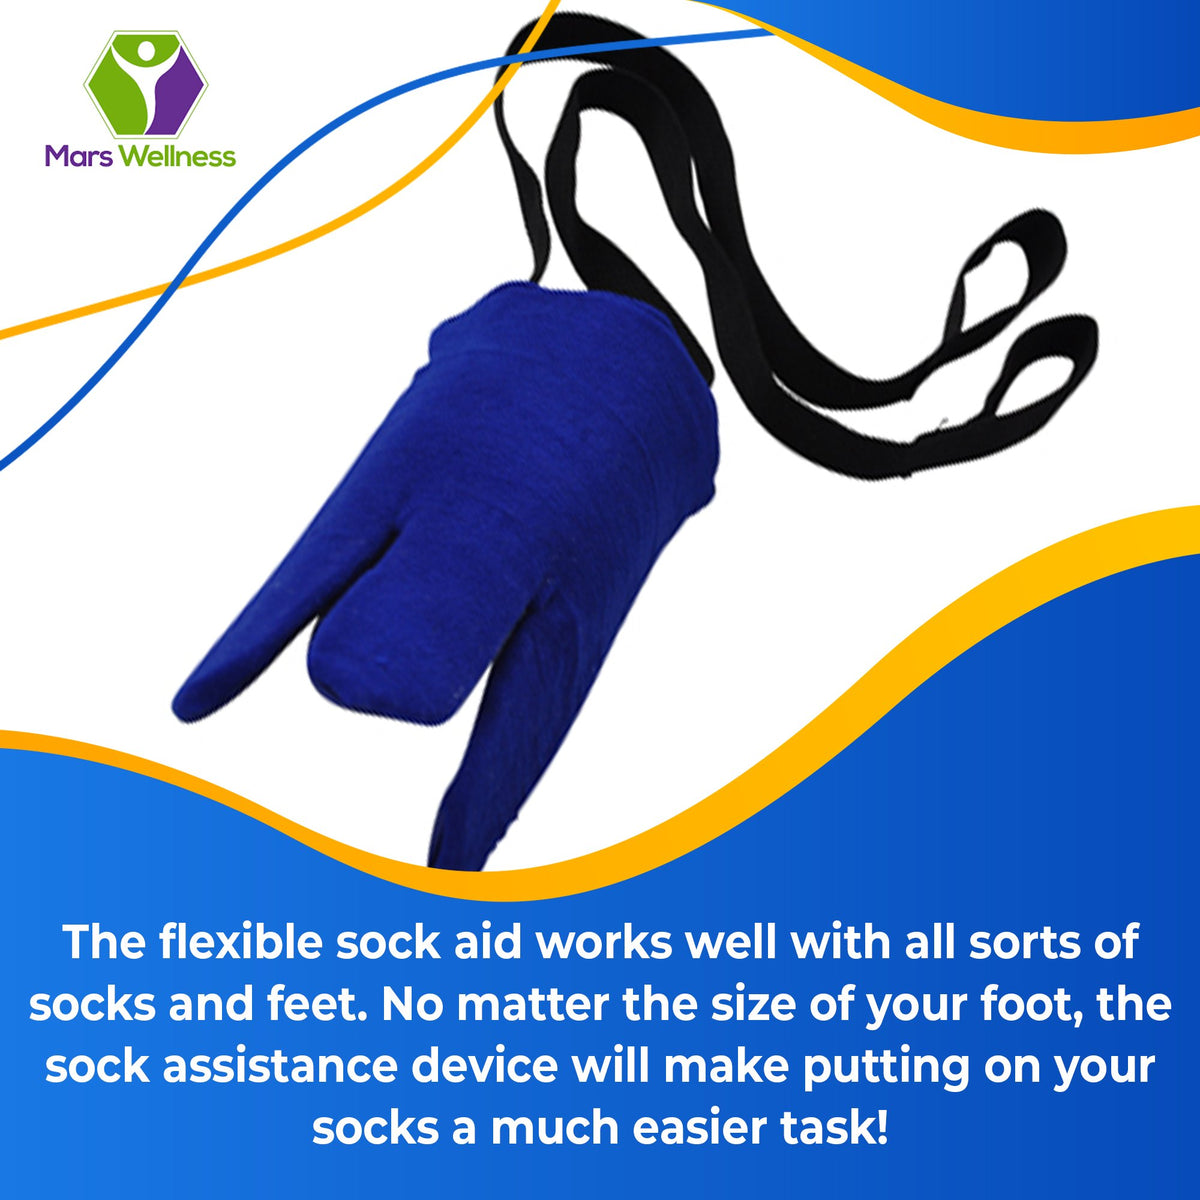 Mars Wellness Flexible Sock Aid - Sock Helper for Seniors, Surgery and Pregnancy, Easy to Use Comfortable Sock Put On Helper for All Sizes and All Sock Types